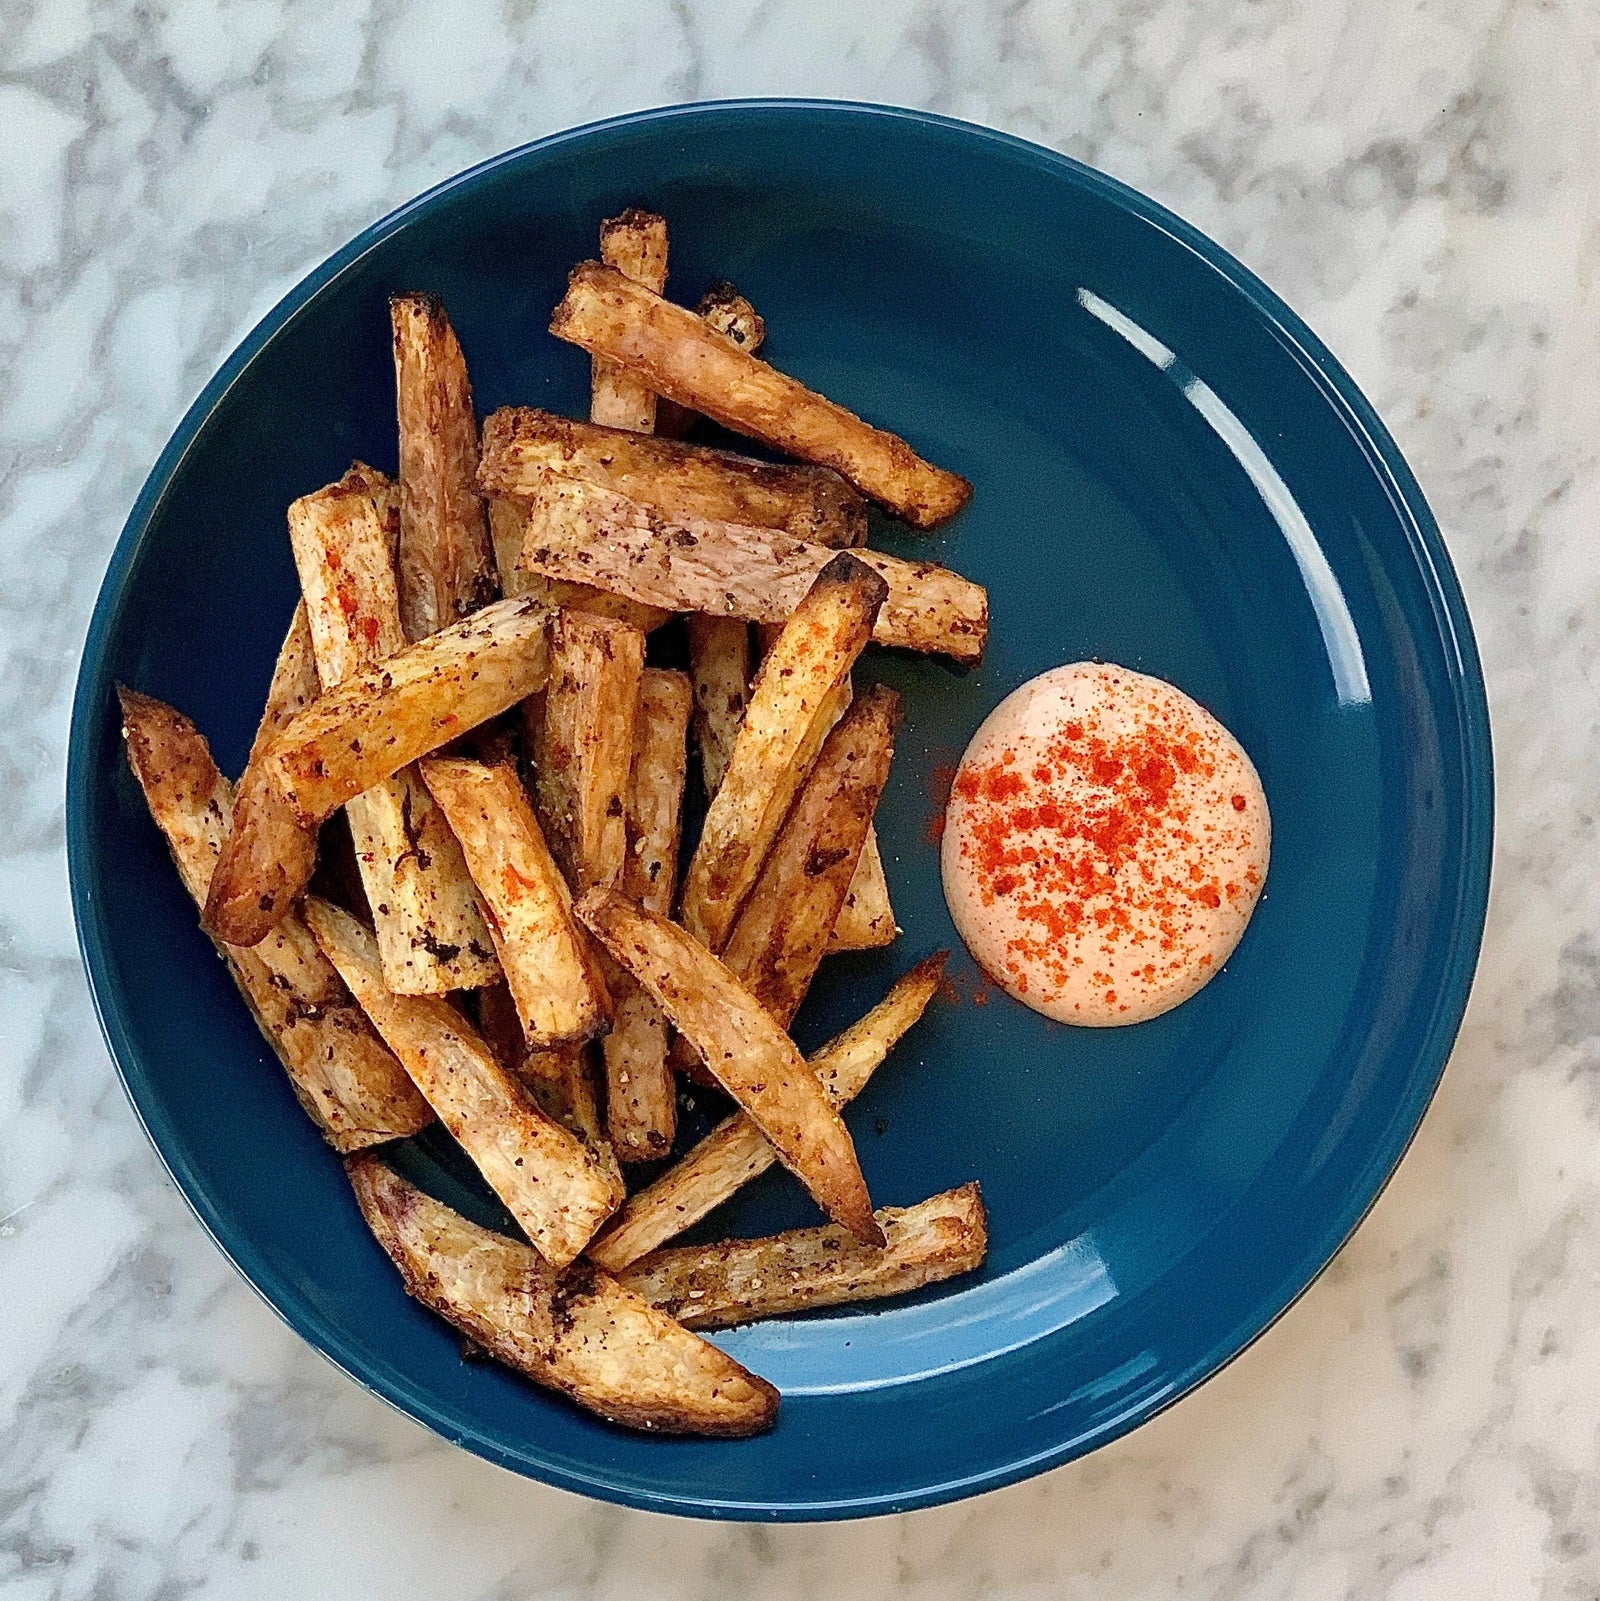 Yuca Fries with Chili Lime Dipping Sauce